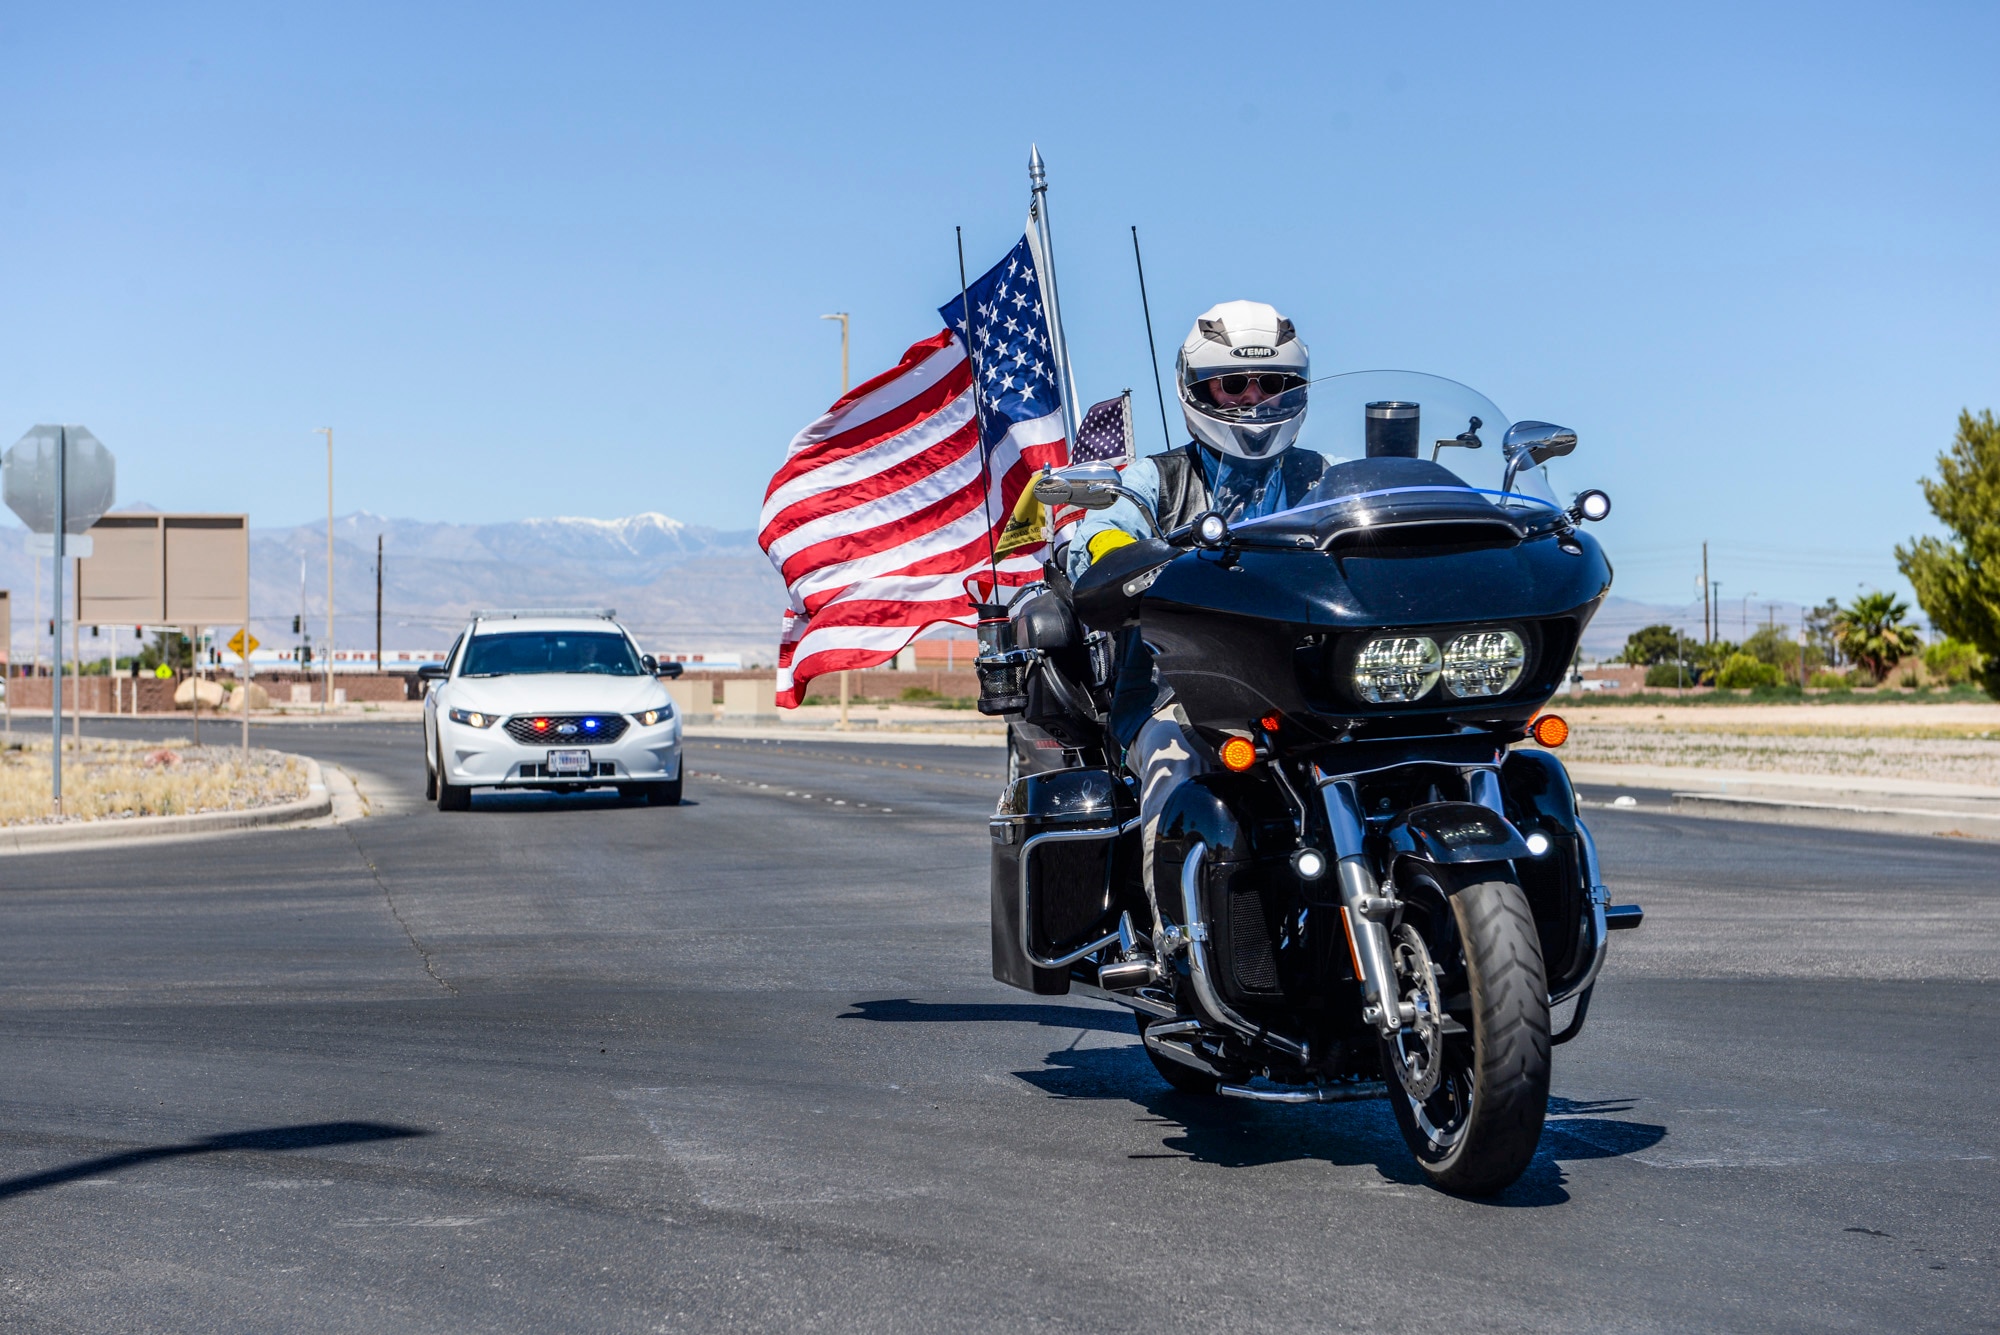 A biker rides his motorcycle while flying the American Flag at Nellis Air Force Base, Nev., May 21, 2017. More than 70 bikers rode together and made a pit stop at Nellis AFB before finishing their ride at Craig Ranch Park for the American Patriot Festival. (U.S. Air Force photo by Airman 1st Class Andrew D. Sarver/Released)